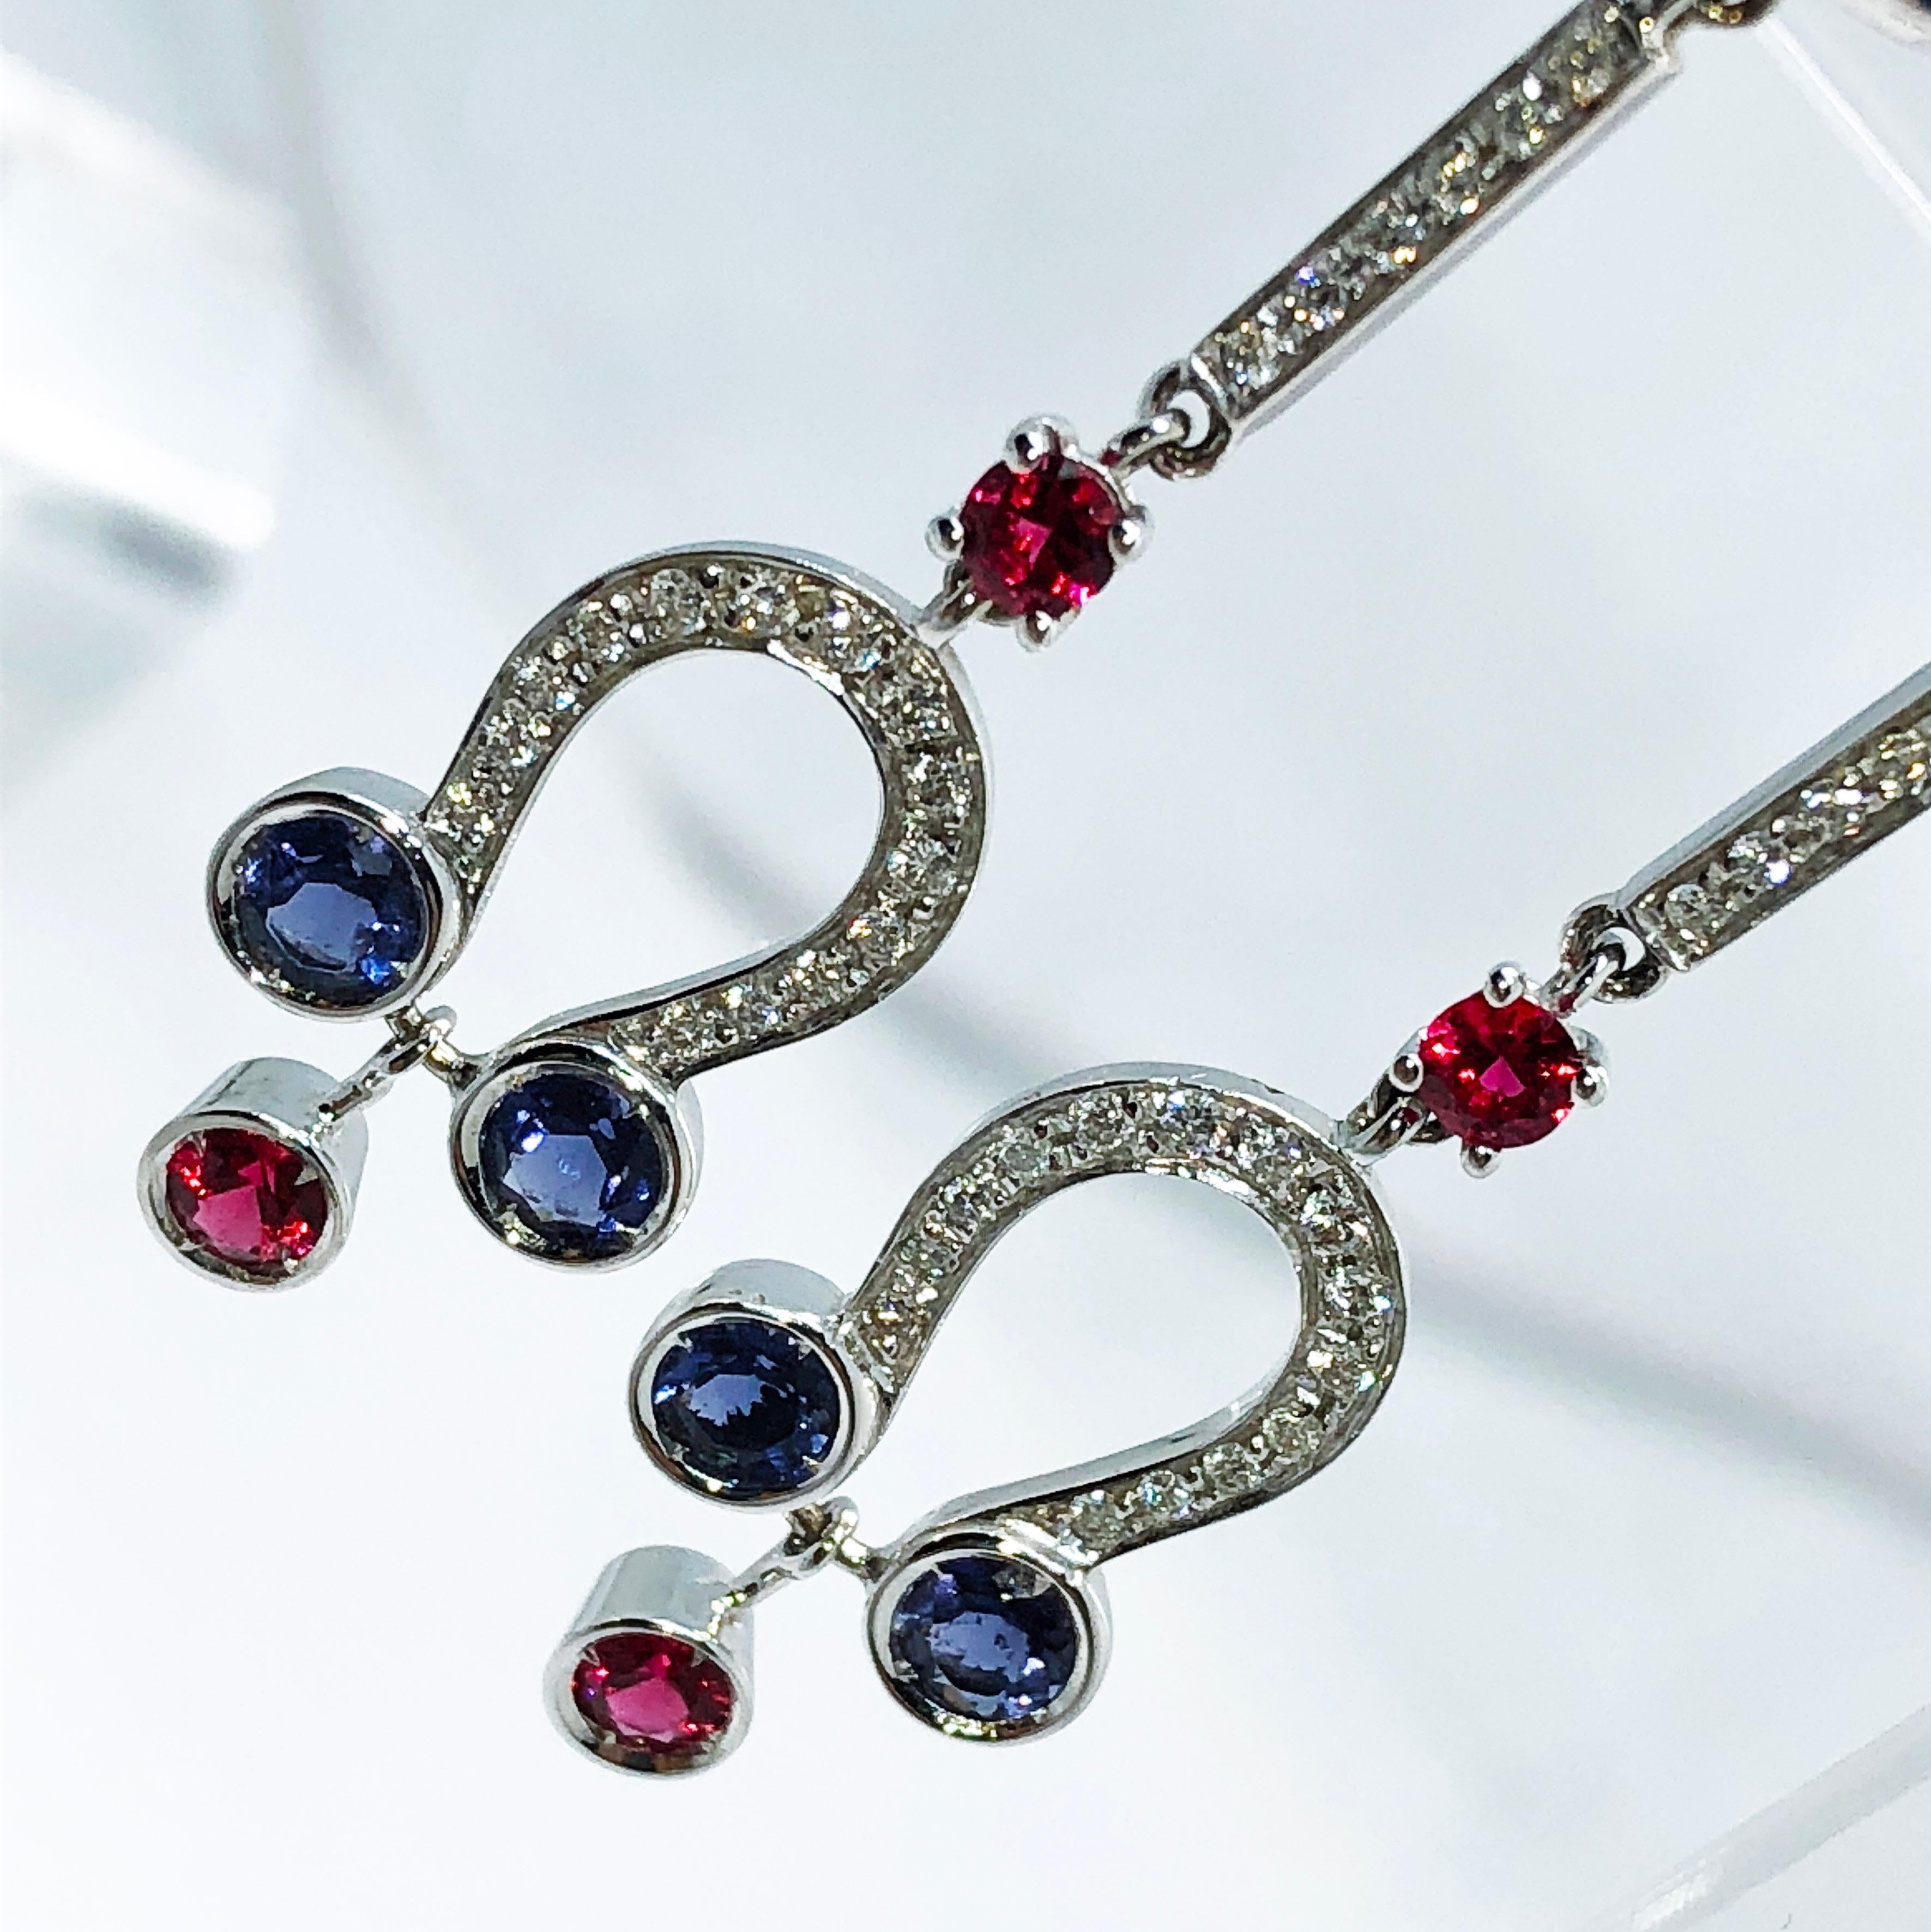 Simple and Chic Art Déco Style Earrings, Blue hand enameled with the antique champslevé technique featuring six Round Rubies(0.73kt), four Iolites (0.46kt), White Diamond(0.35kt) in a 18kt White Gold Setting.
In our fitted tobaco leather case.

